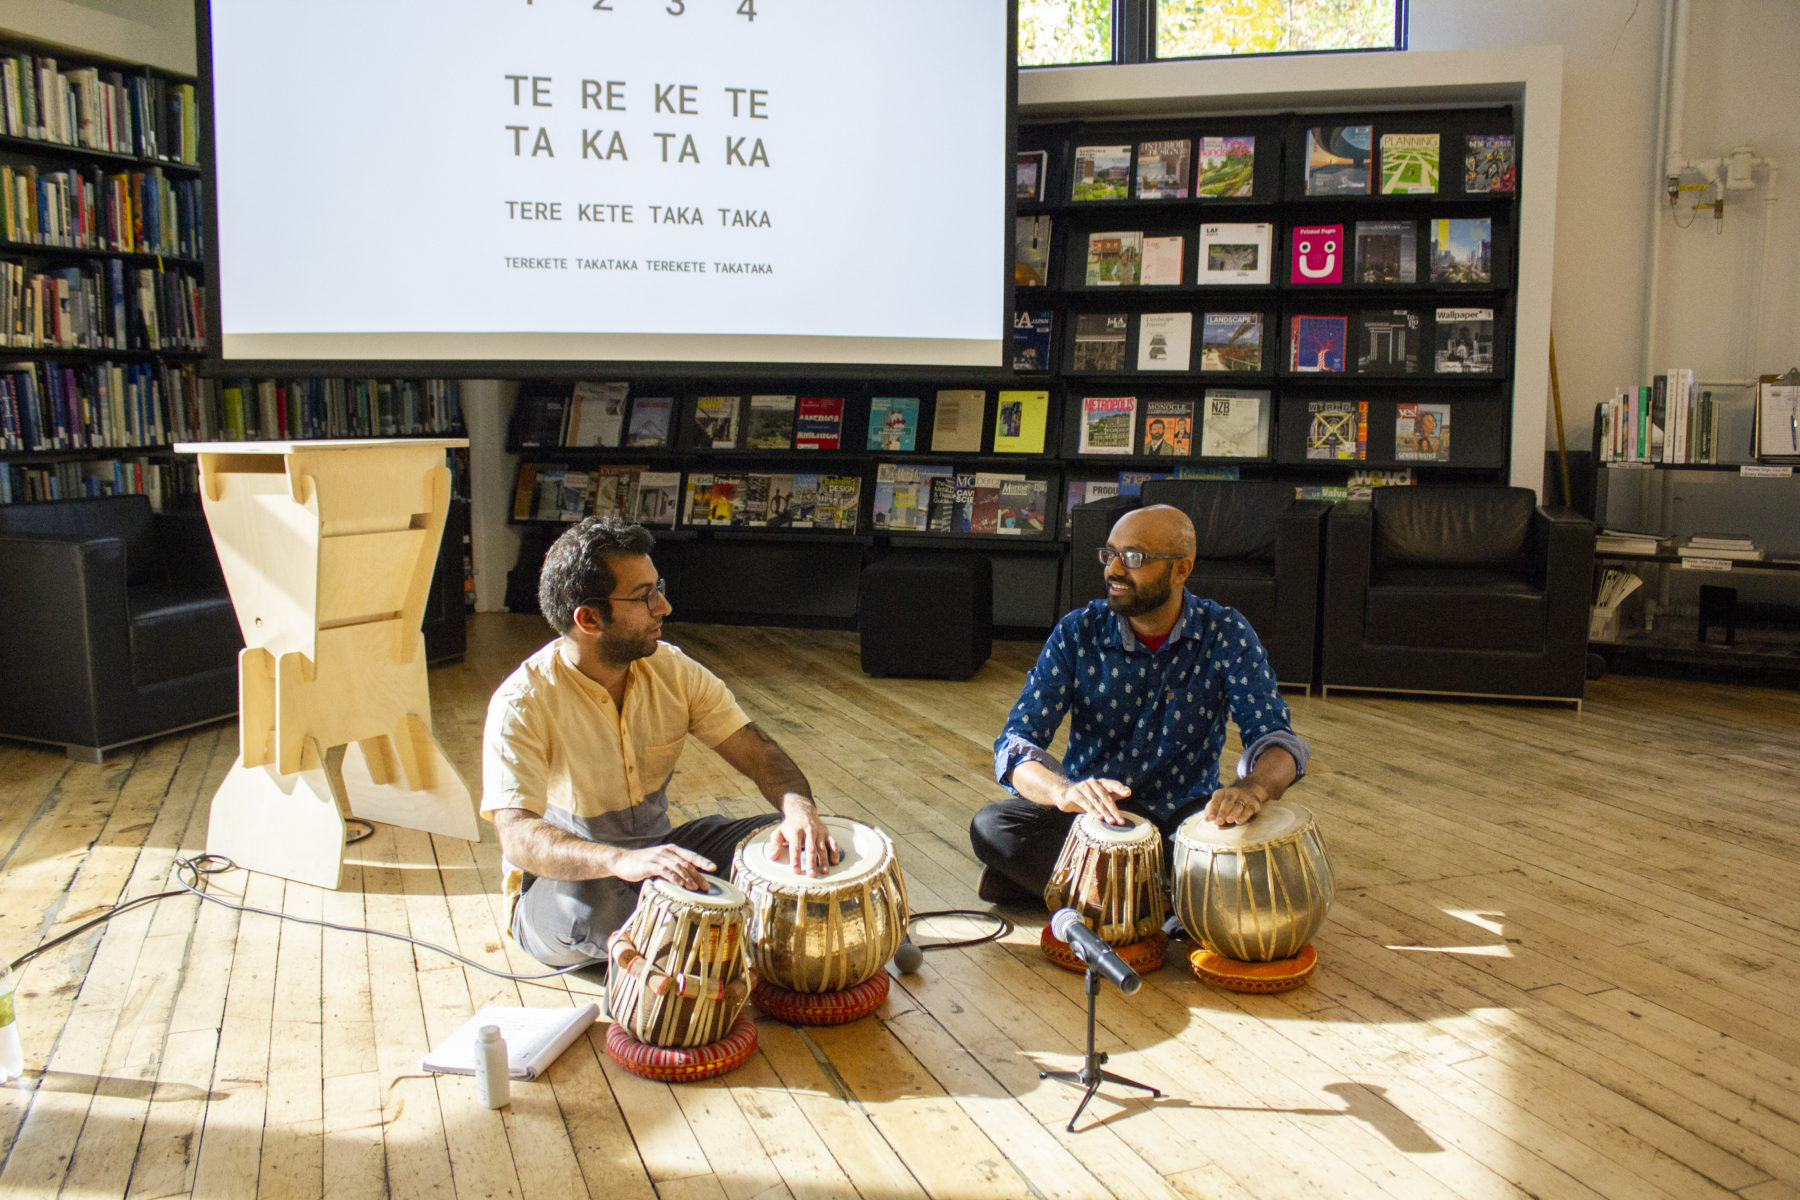 two people sitting on the floor playing tablas